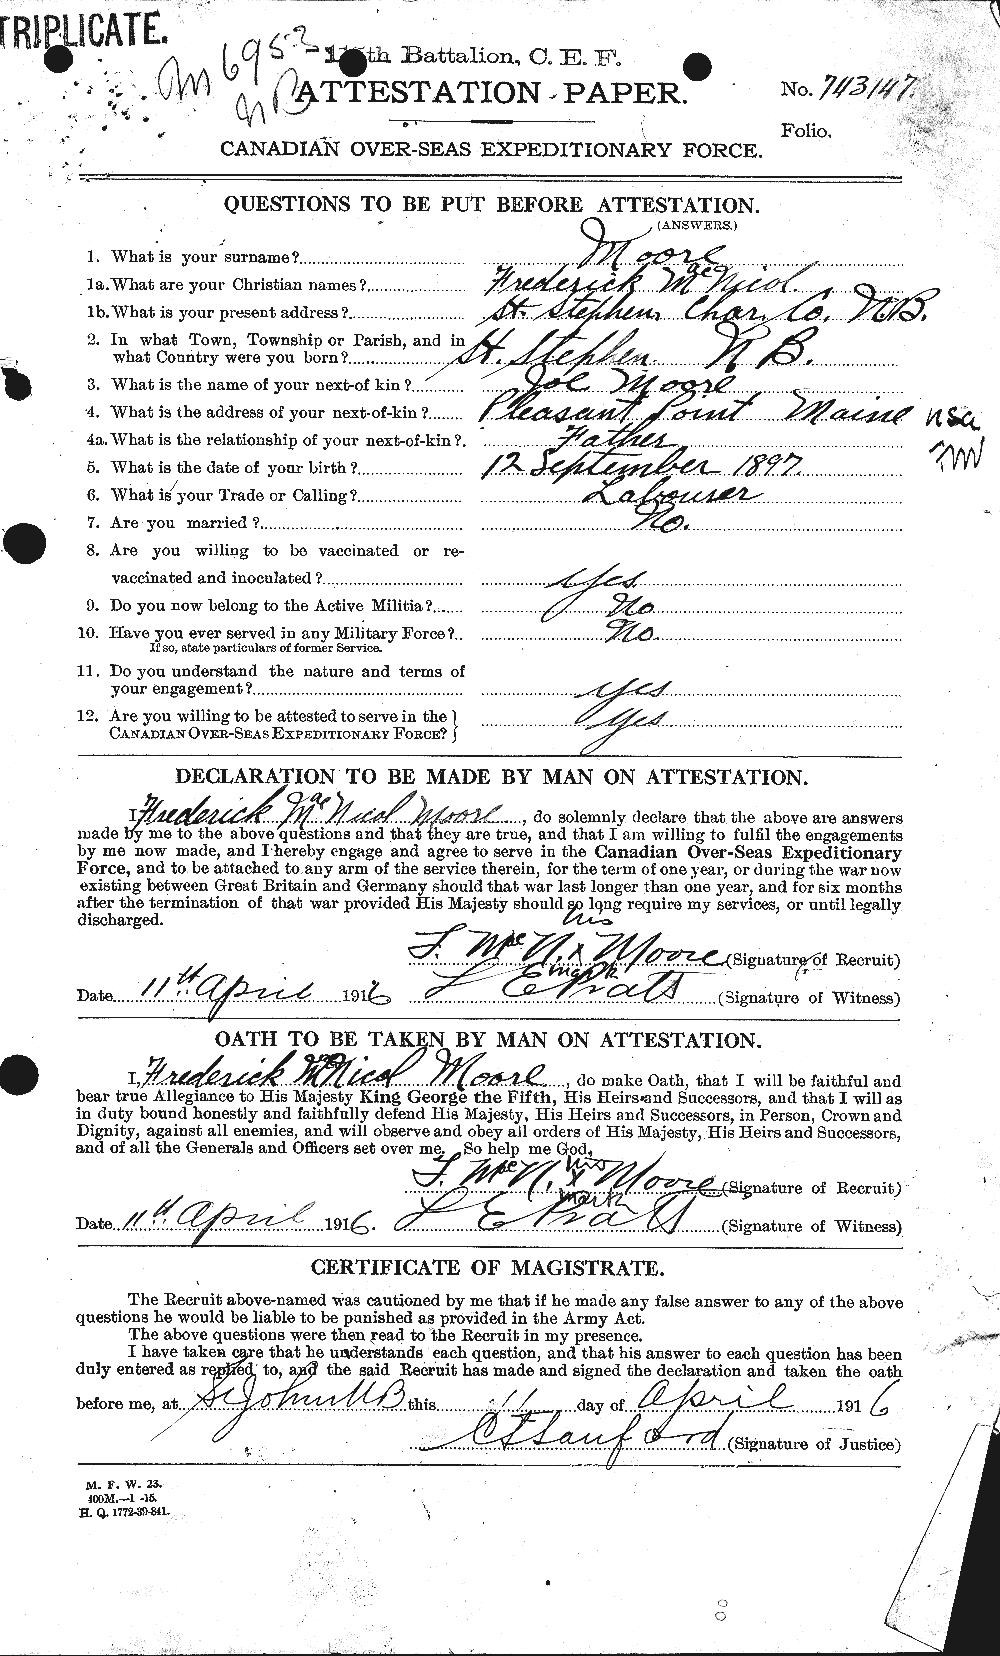 Personnel Records of the First World War - CEF 506754a